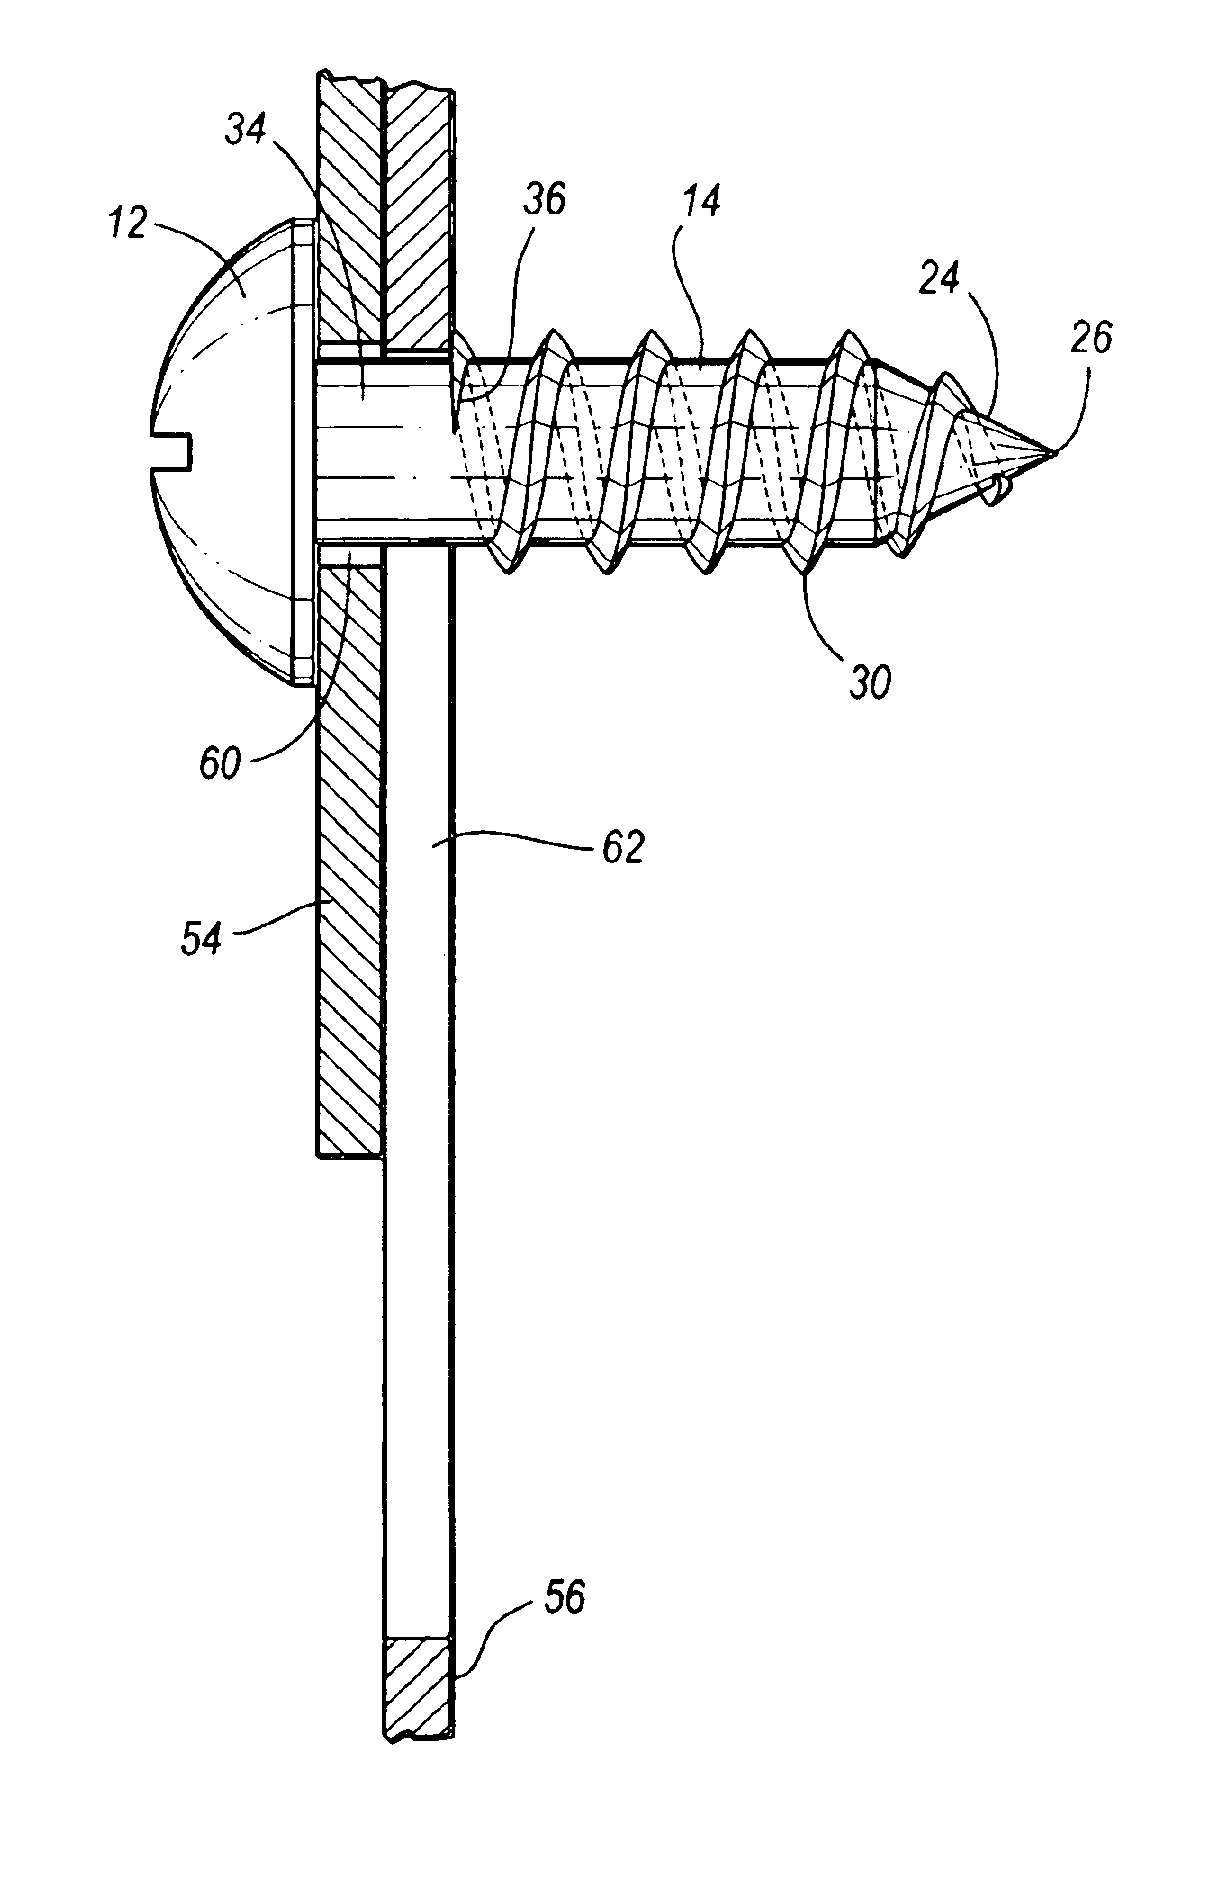 Pole joint screw for a basketball goal system